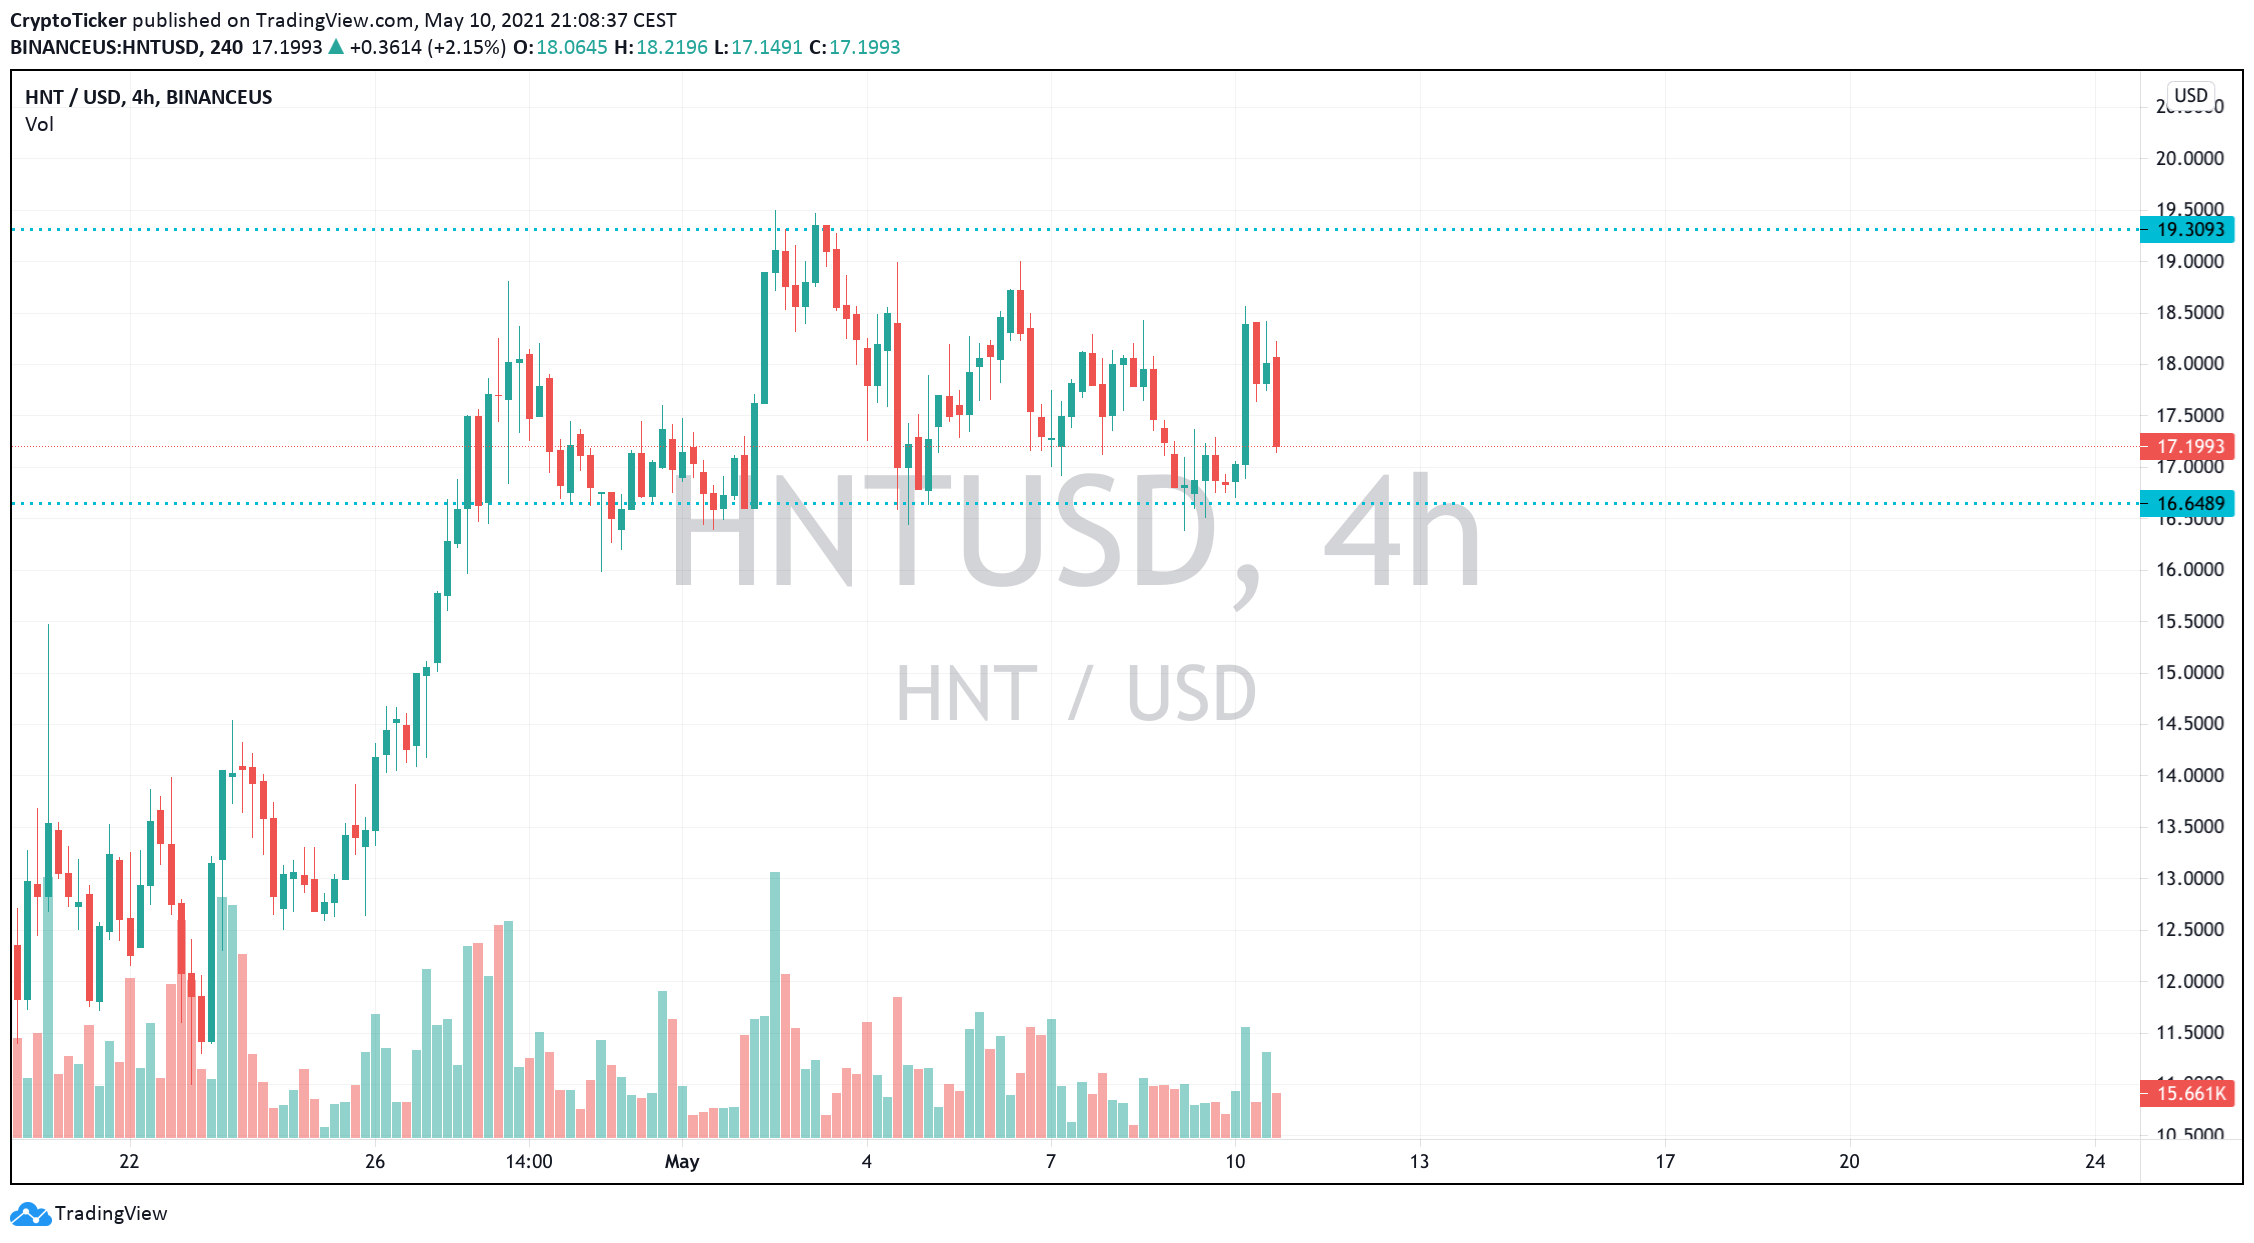 Top 5 Altcoins to buy in May - HNT/USD 4-hour chart